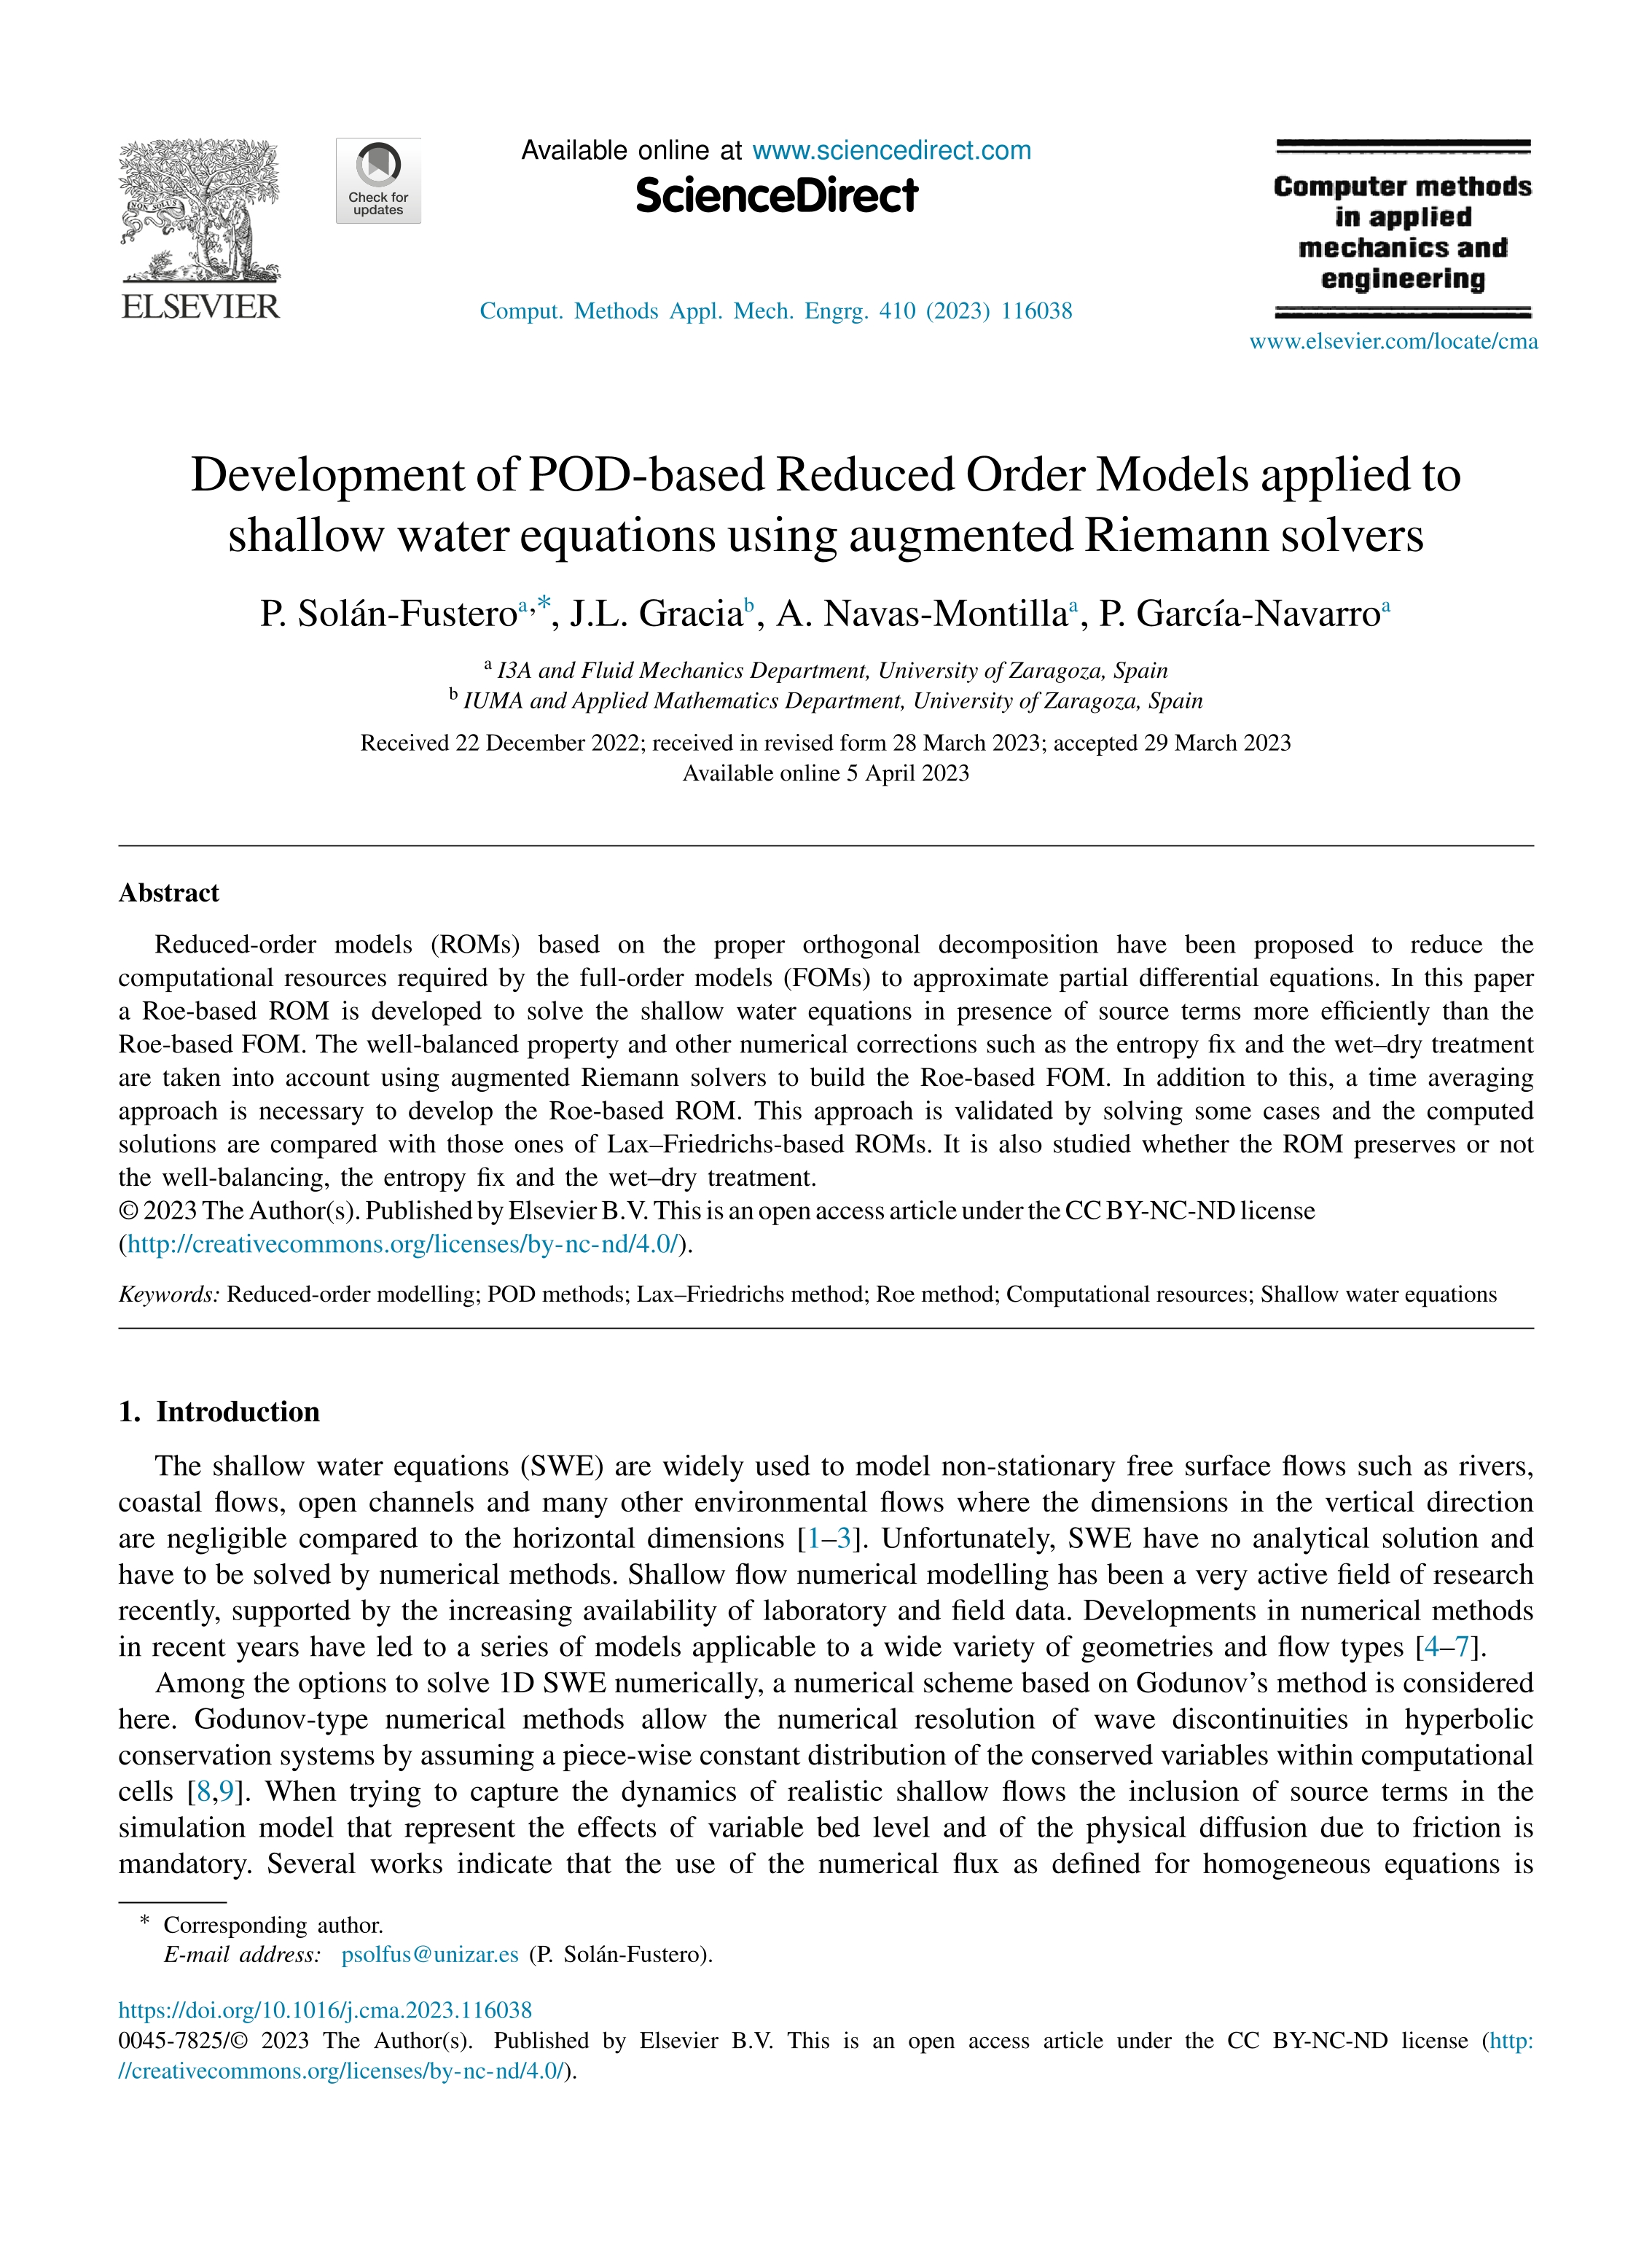 Development of POD-based Reduced Order Models applied to shallow water equations using augmented Riemann solvers